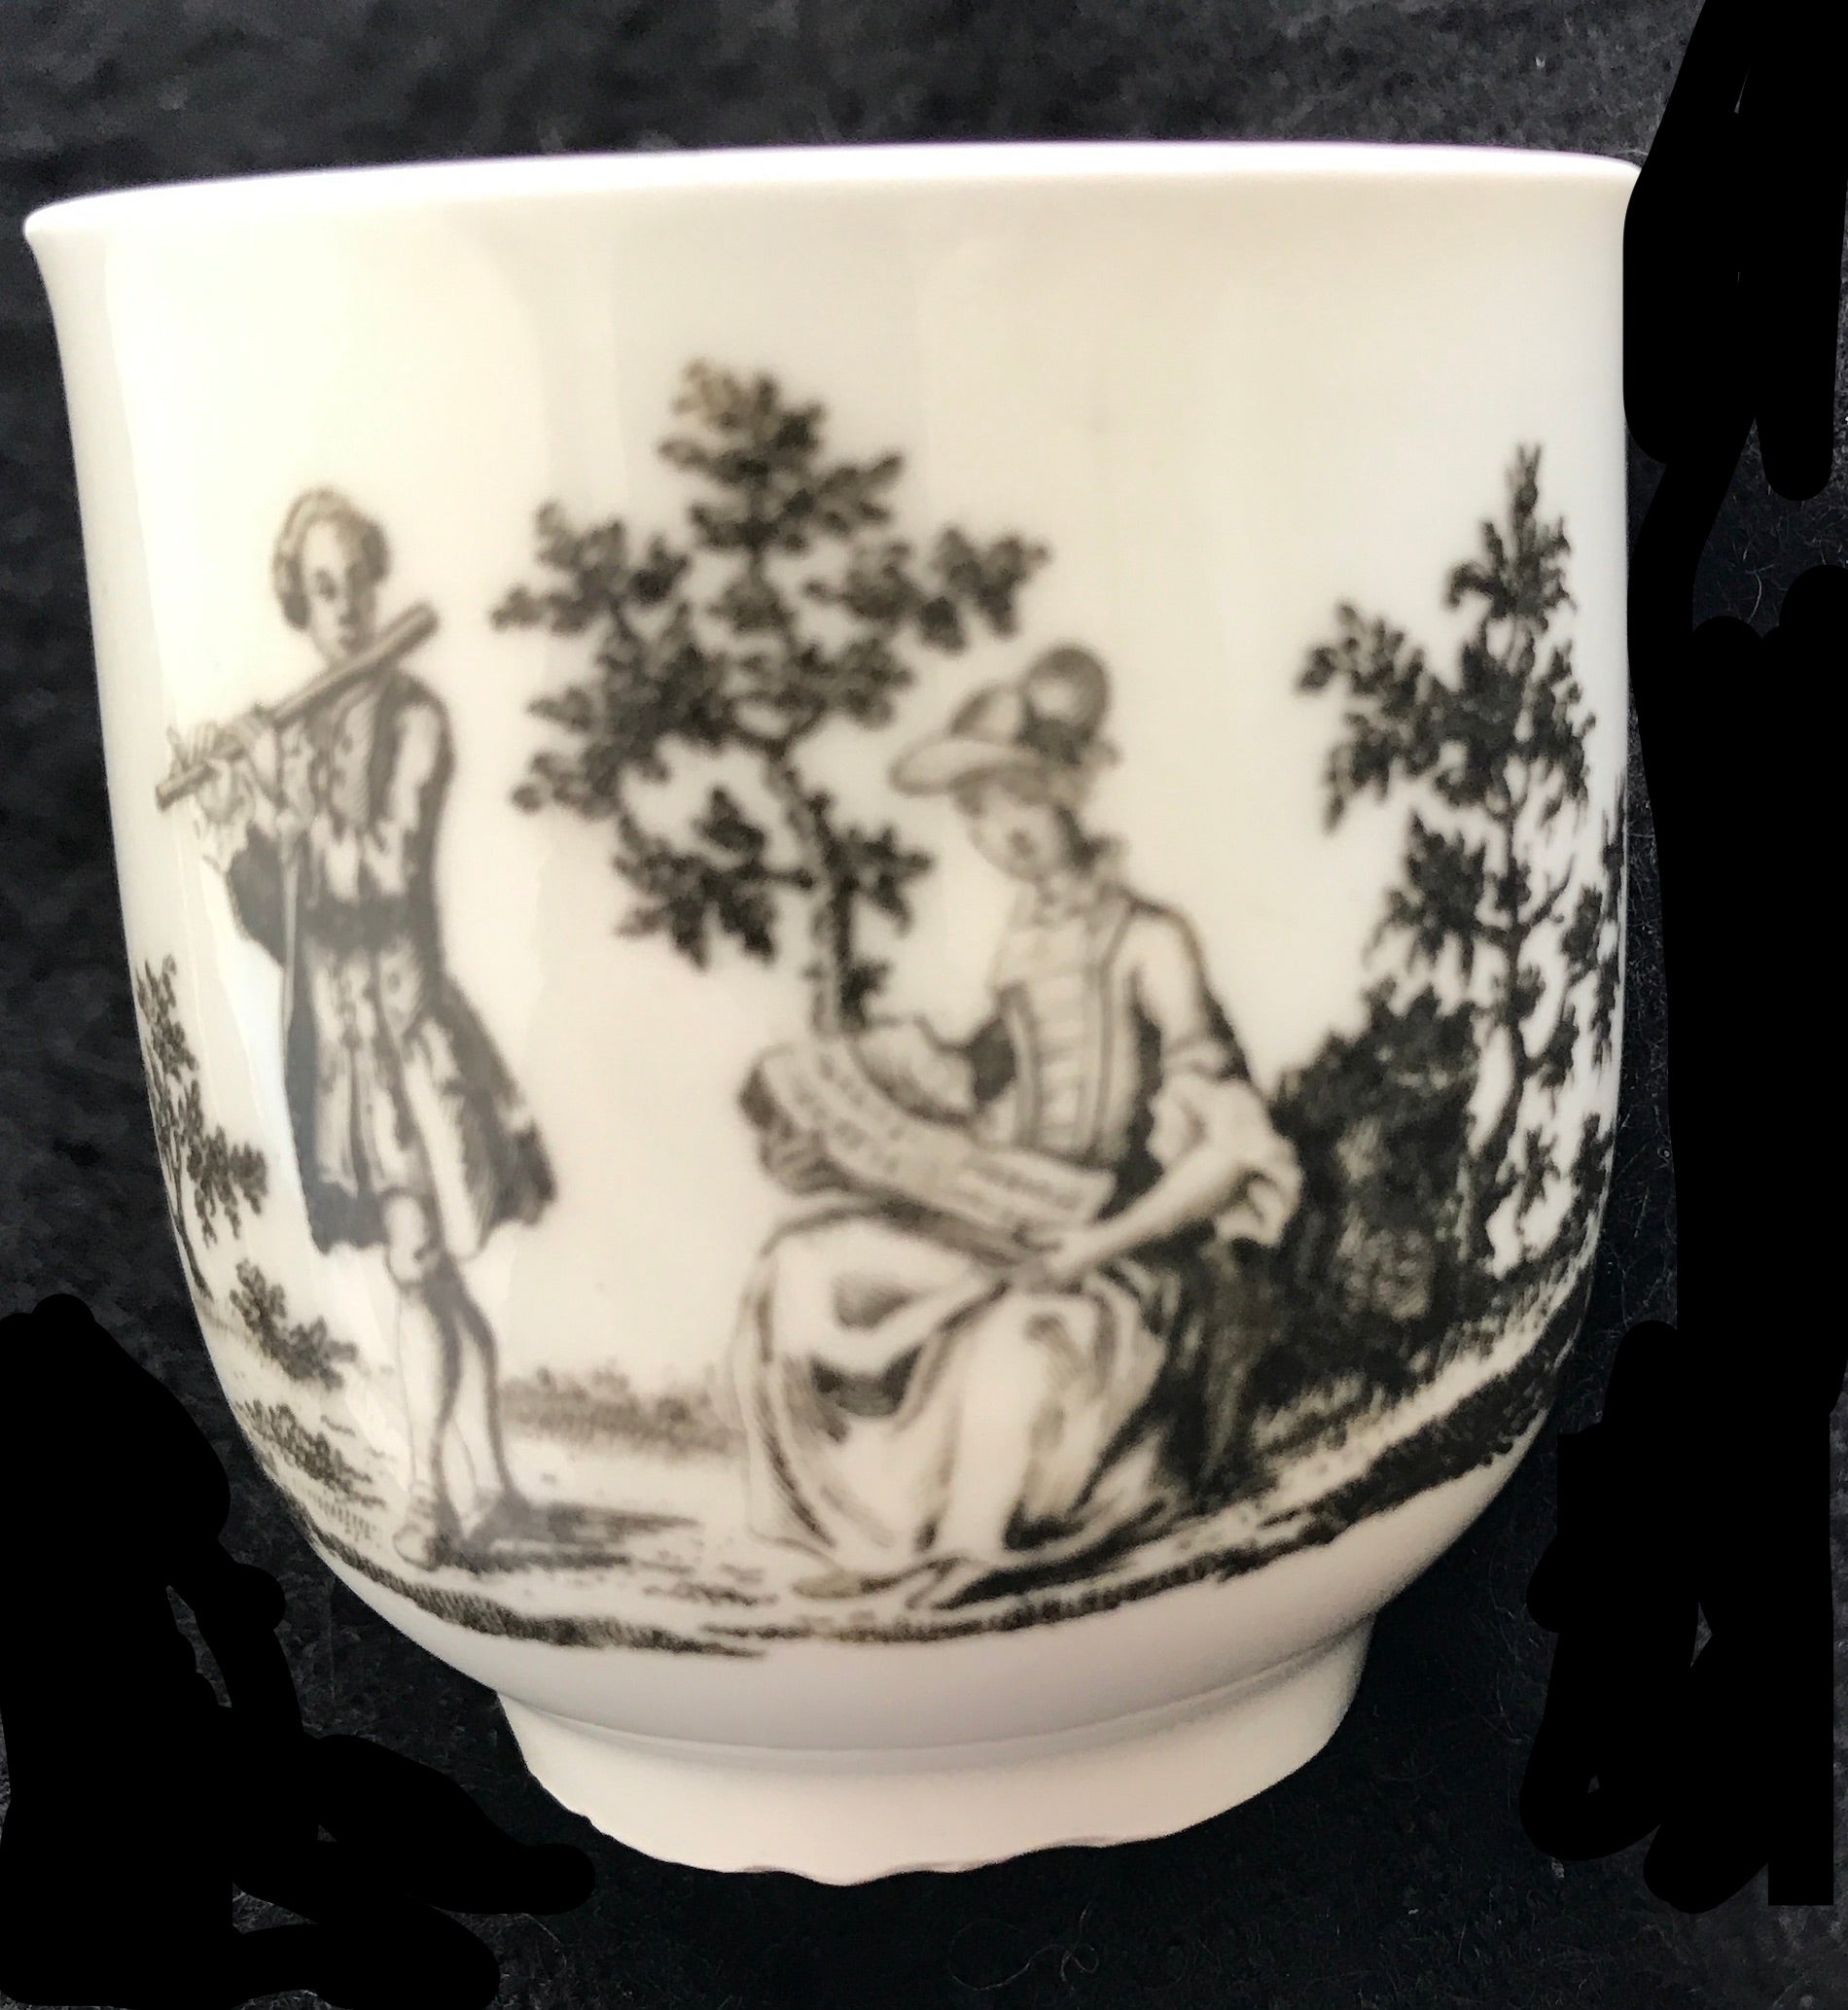 Rare 18th Century Worcester Porcelain Coffee Cup Singing Lesson Variant Print.